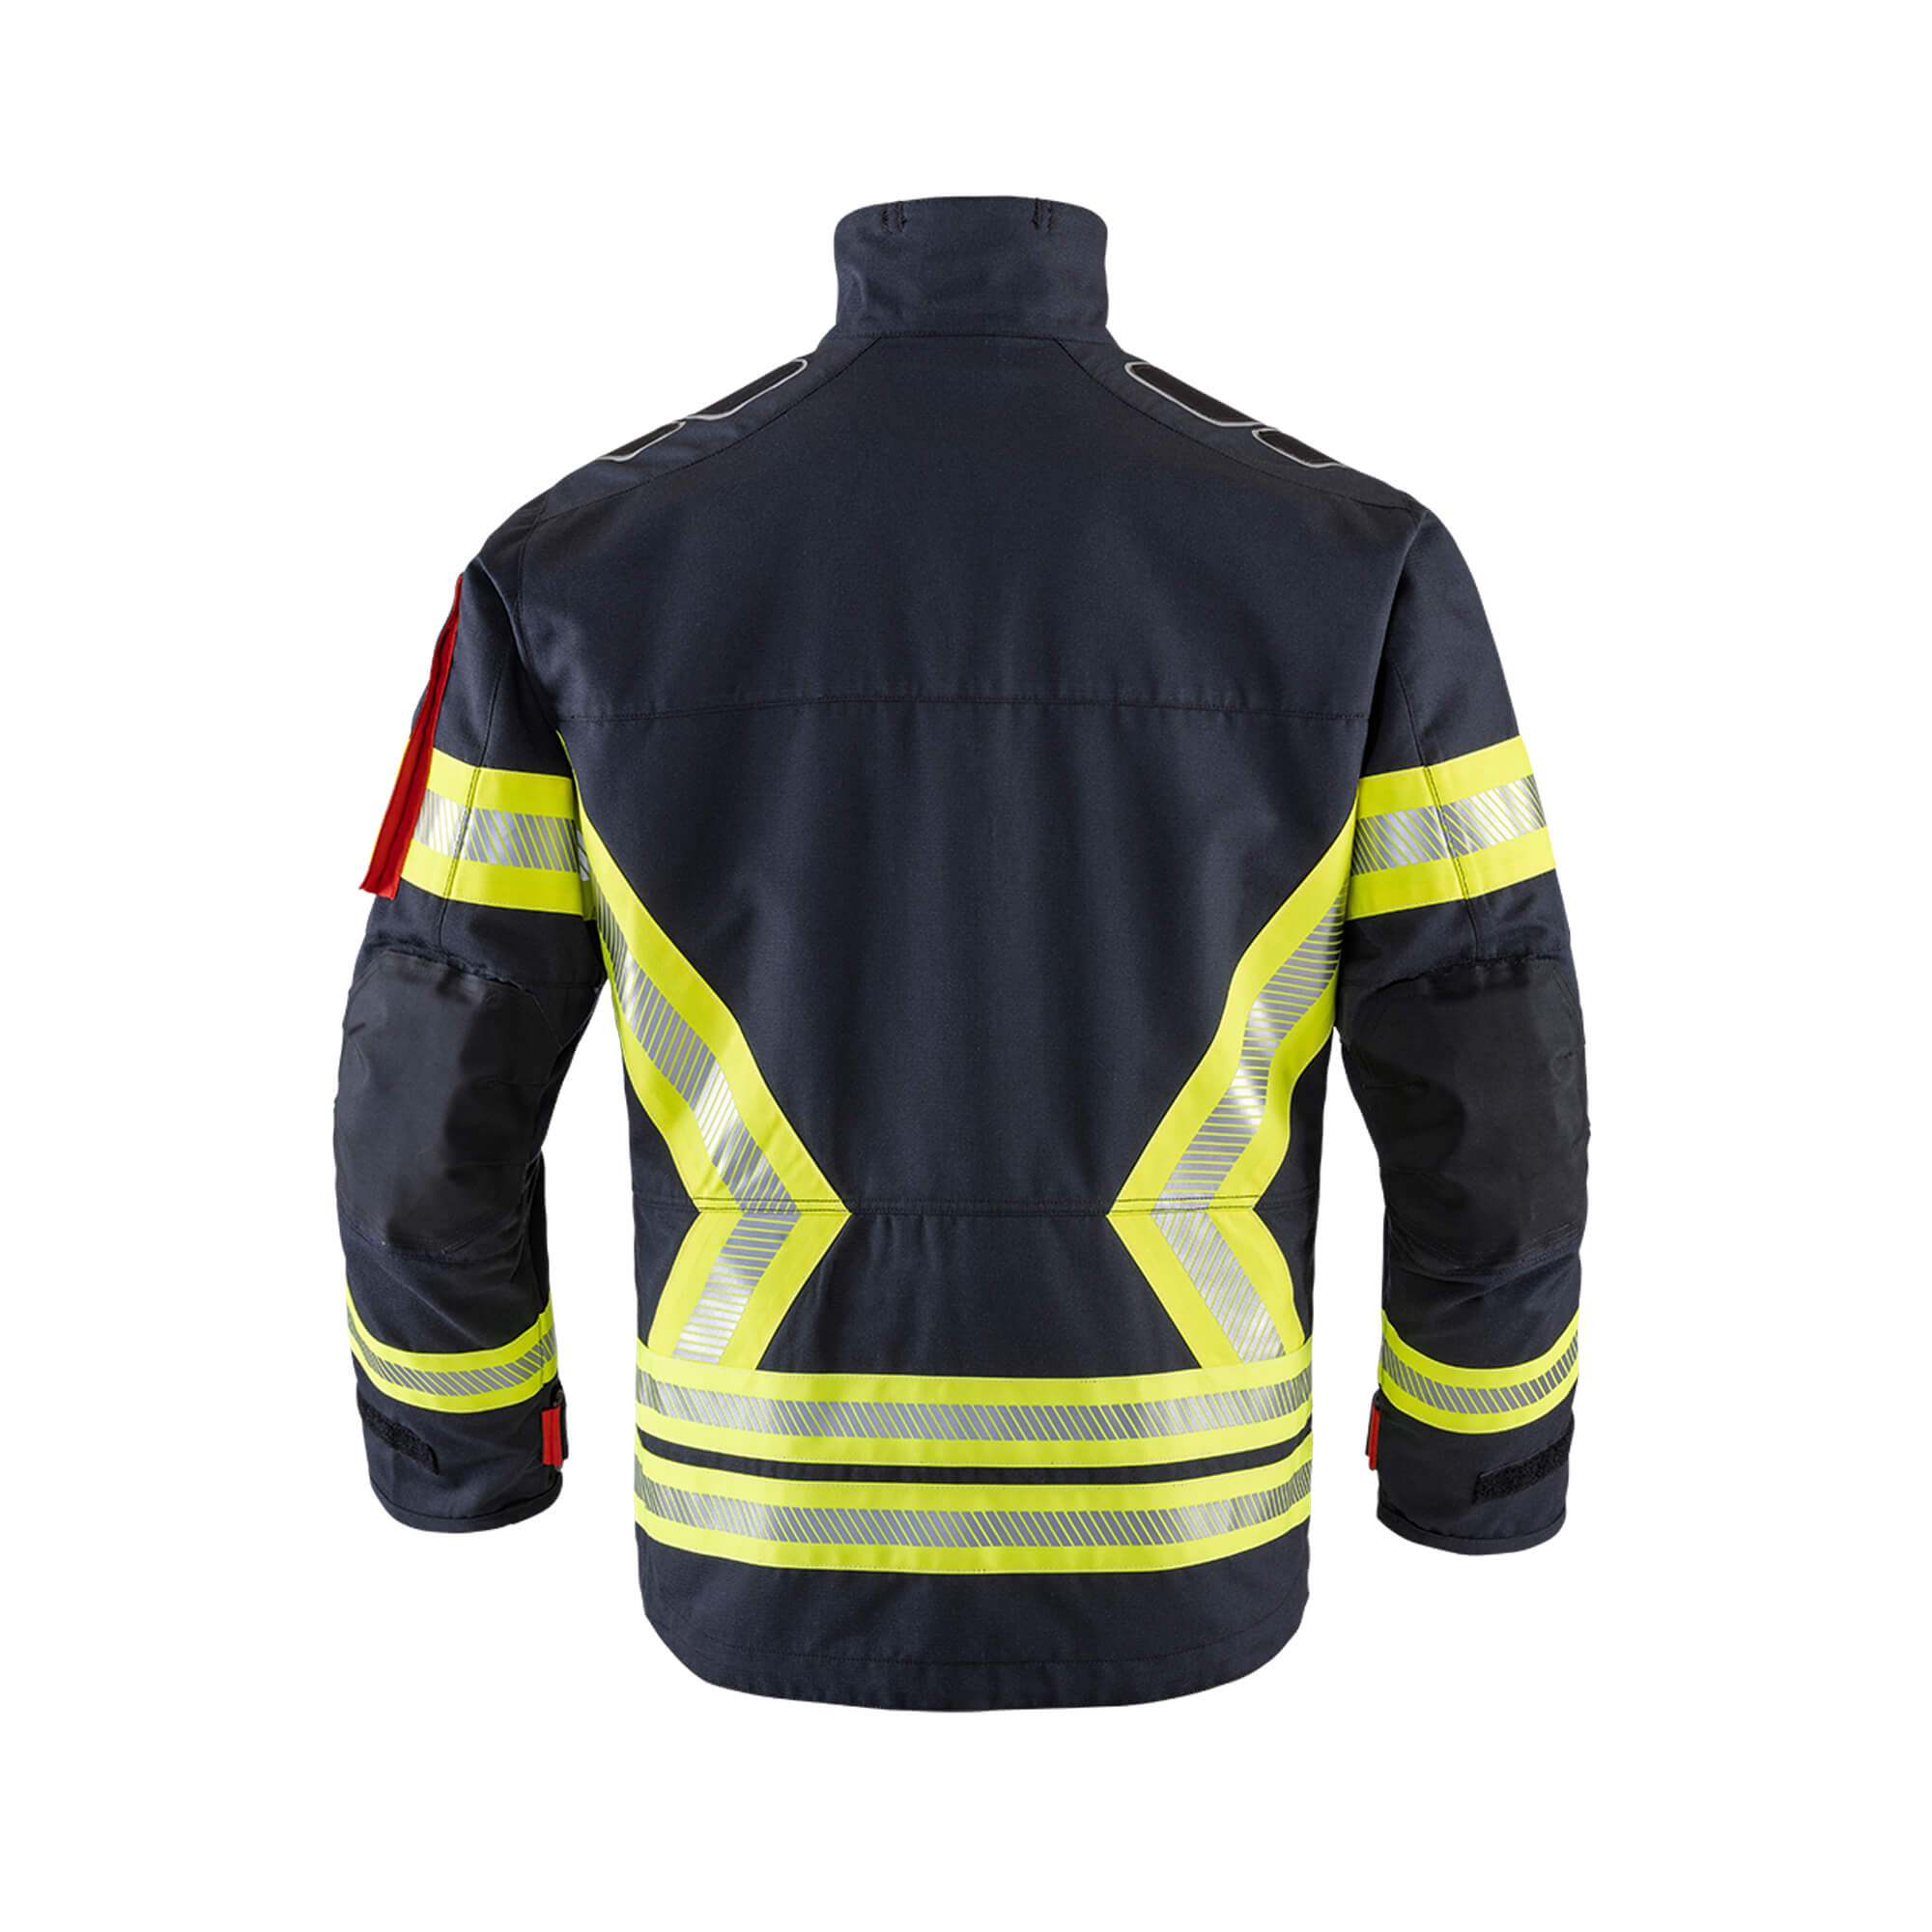 Protective firefighting suit Texport Fire Recon